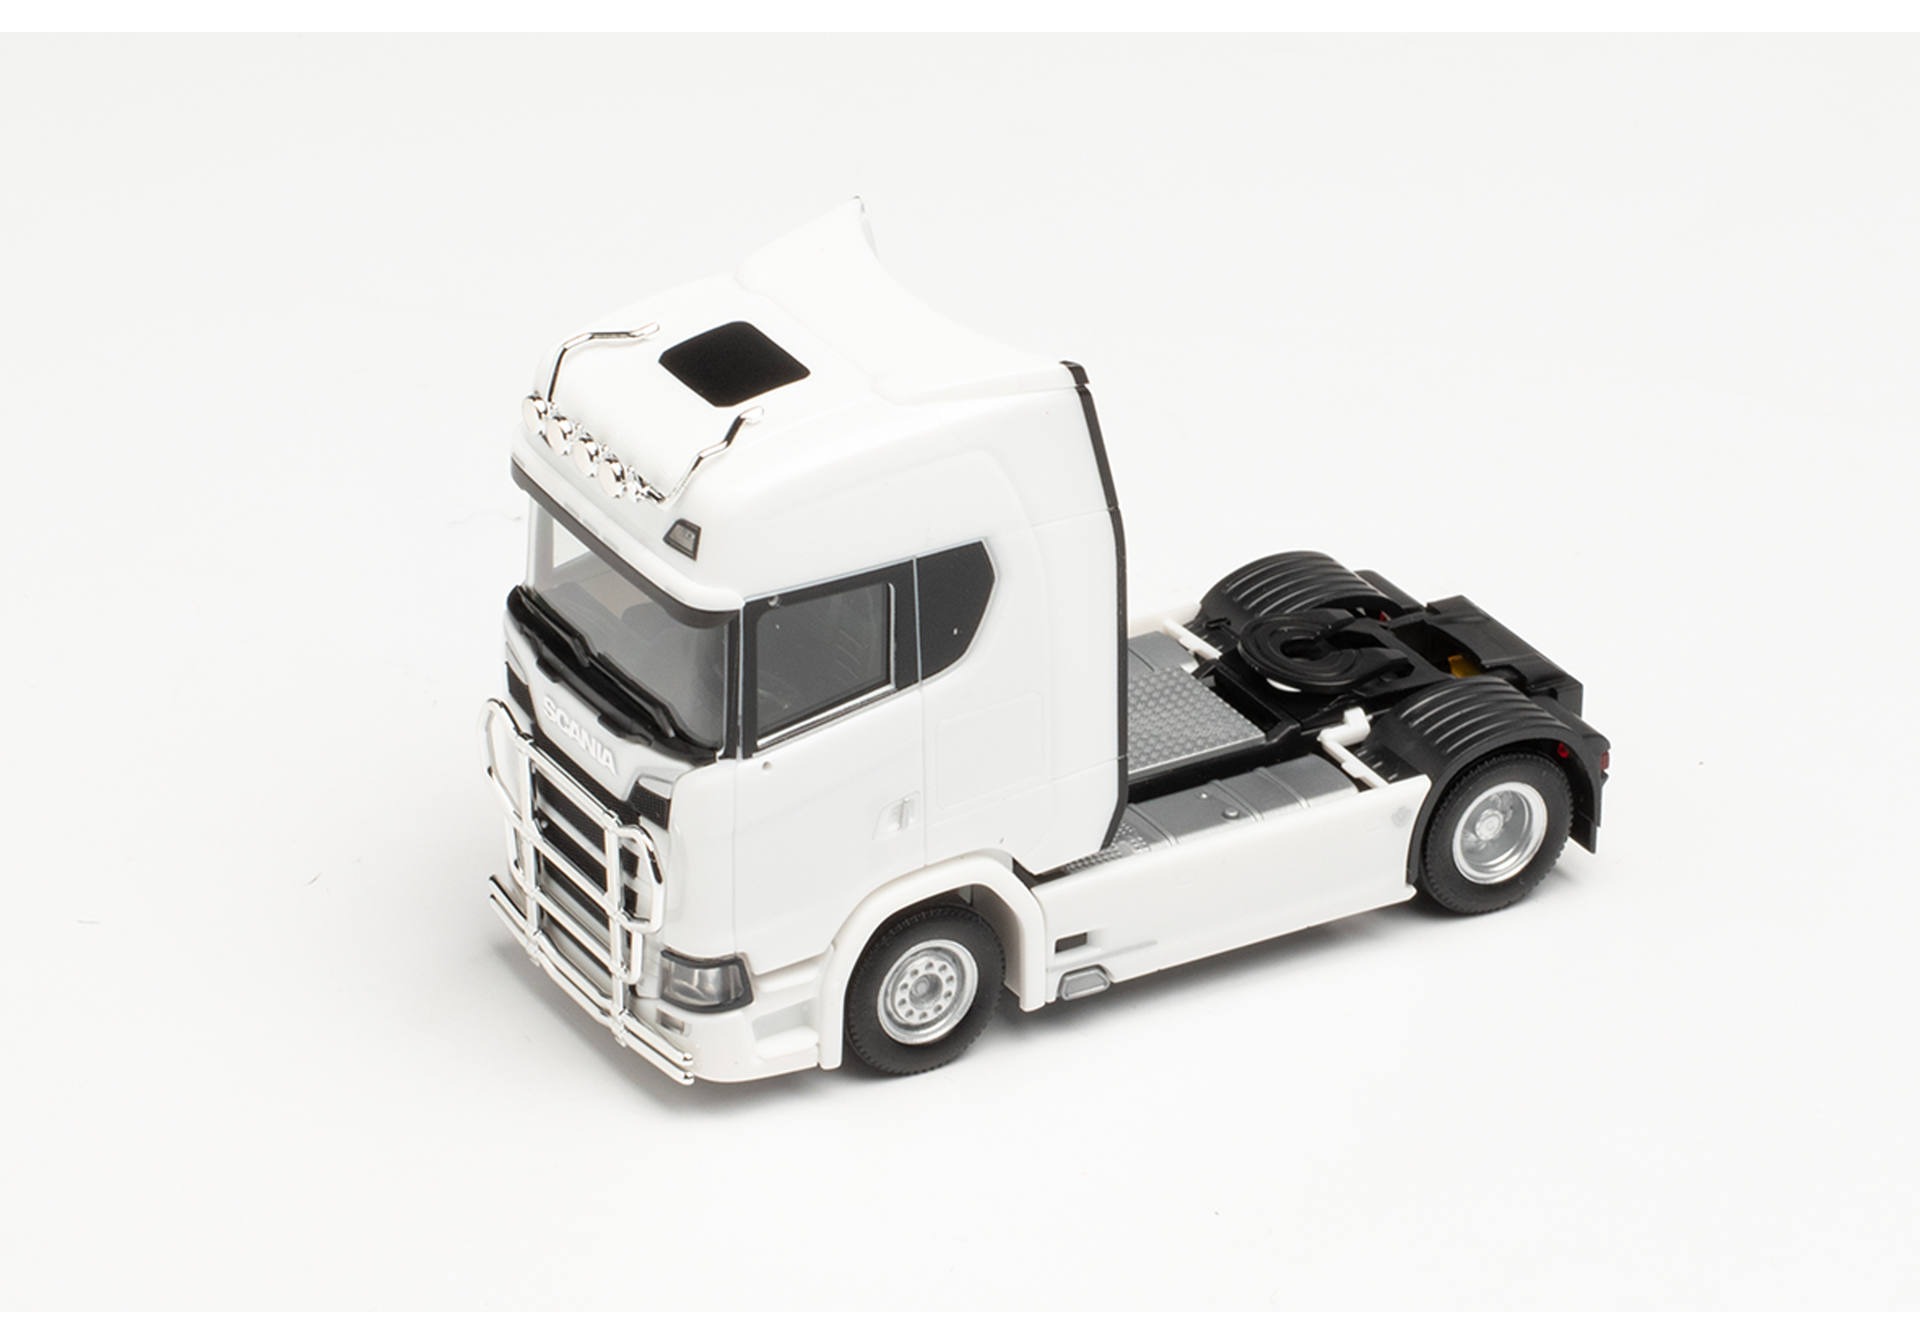 Scania CS 20 high-roof tractor with light bar and bumper, white